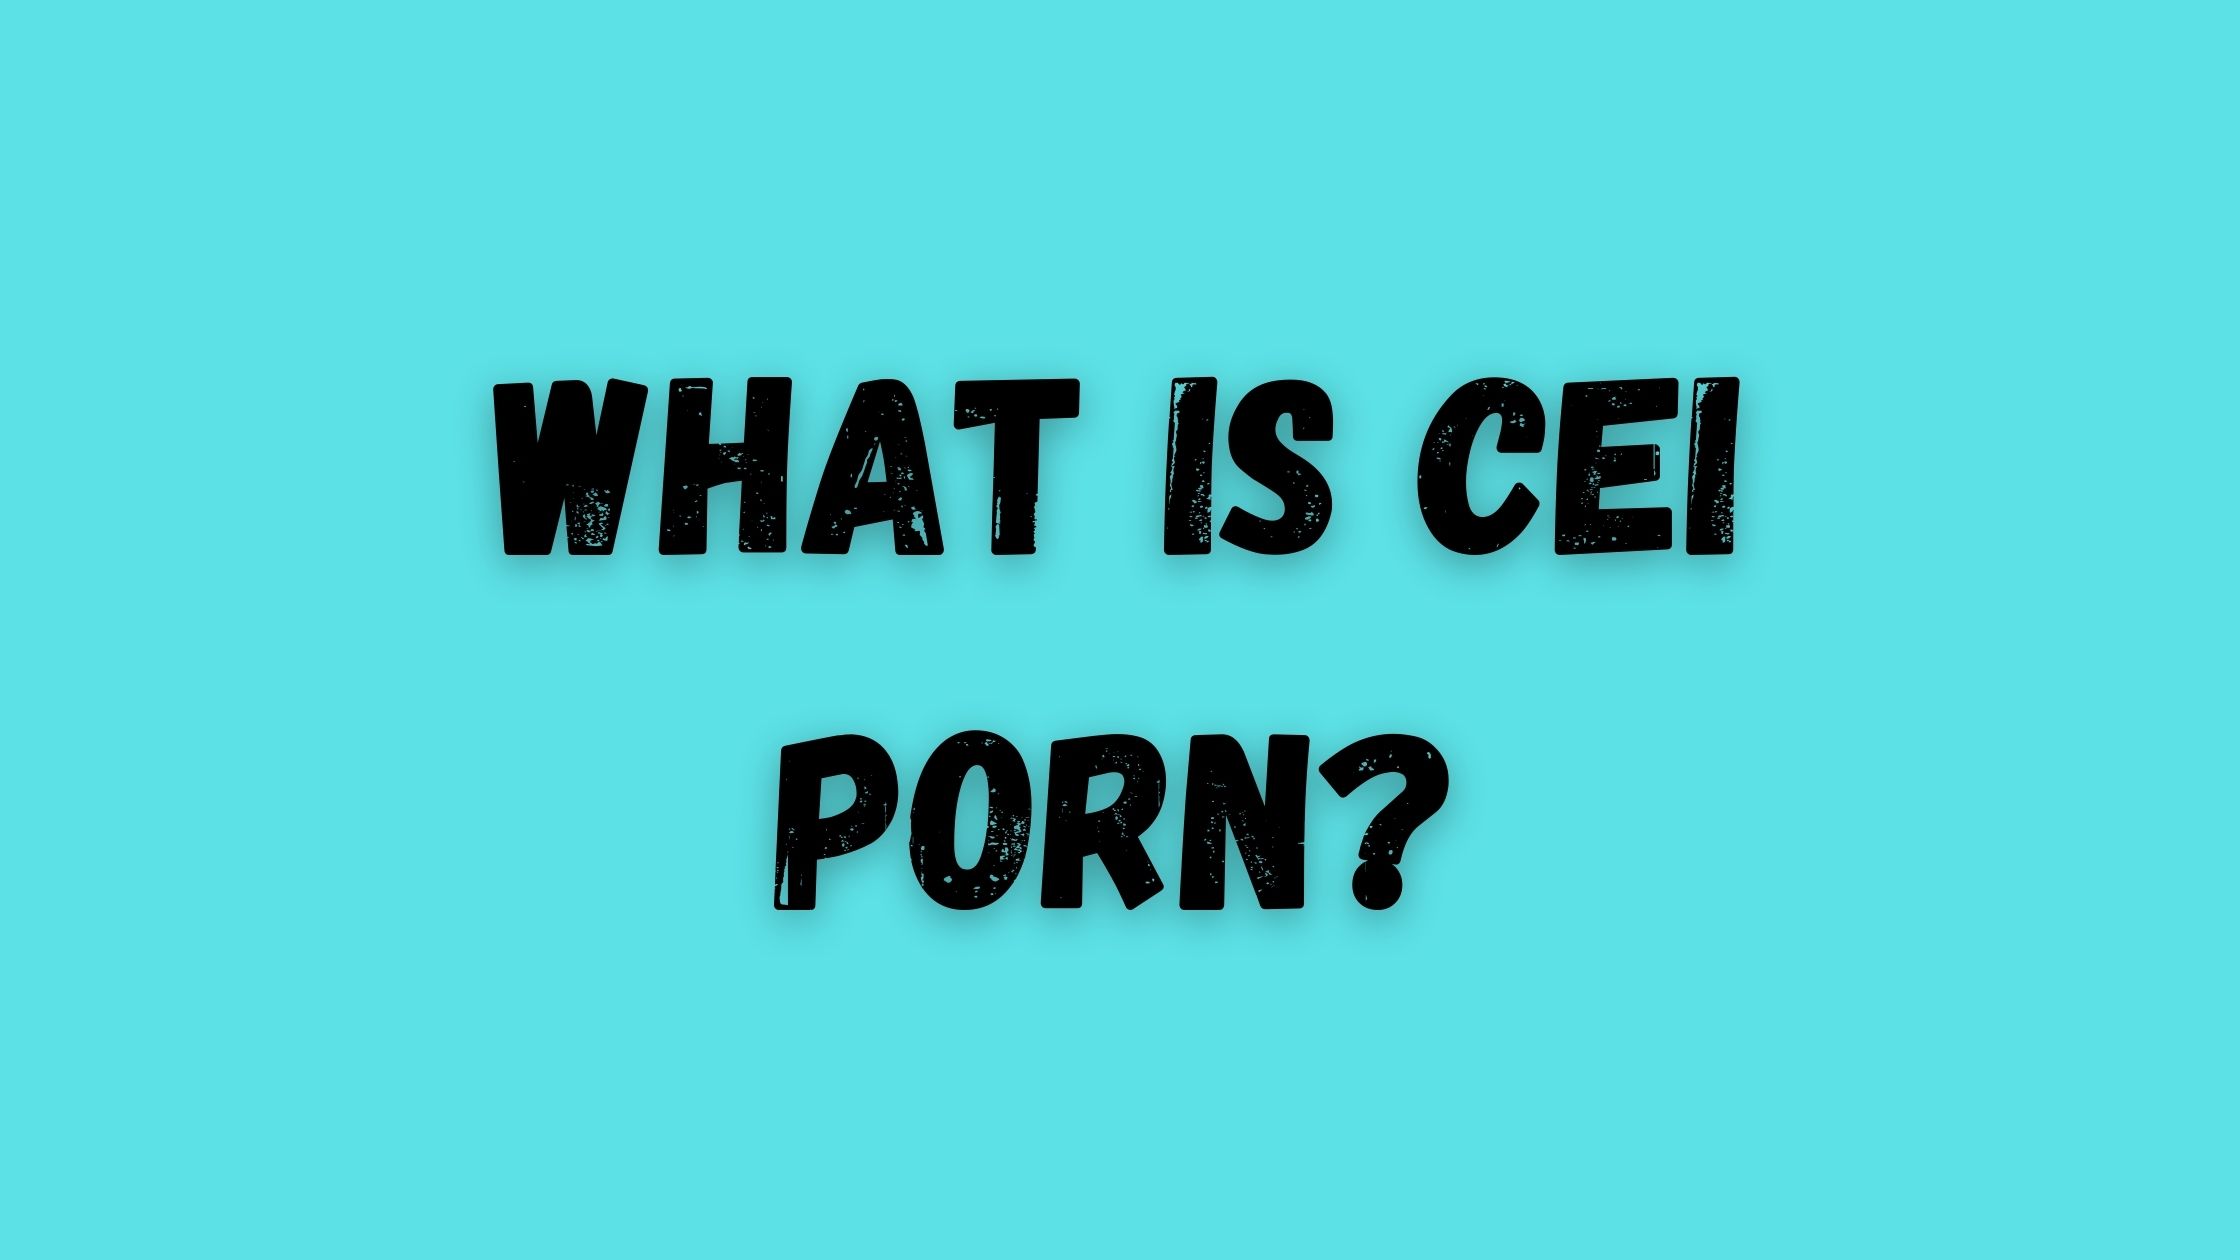 ashley benham recommends what is cei porn pic